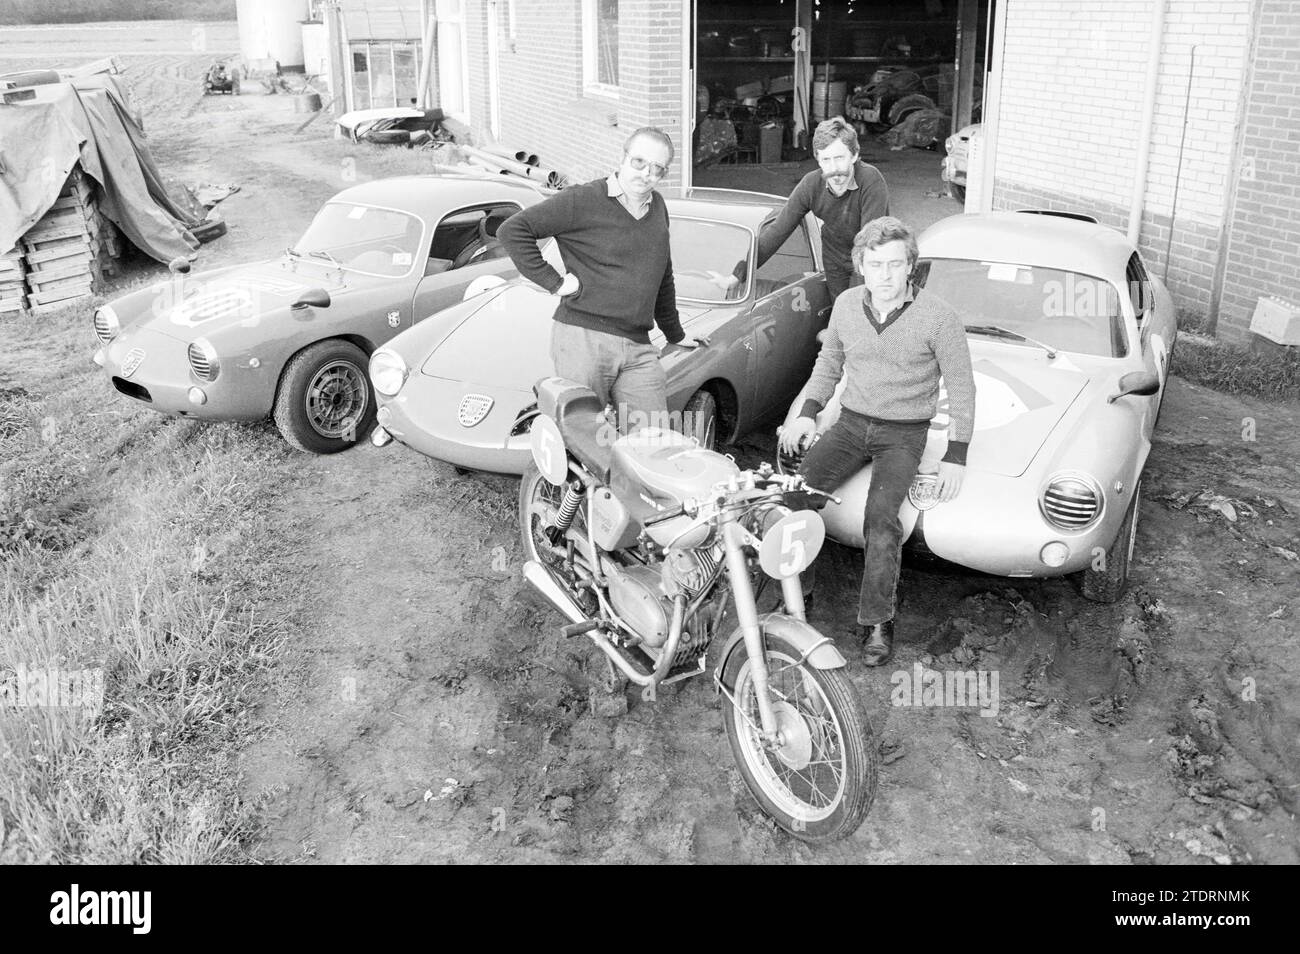 3 people with 3 racing cars and motorcycle, 10-05-1983, Whizgle News from the Past, Tailored for the Future. Explore historical narratives, Dutch The Netherlands agency image with a modern perspective, bridging the gap between yesterday's events and tomorrow's insights. A timeless journey shaping the stories that shape our future Stock Photo